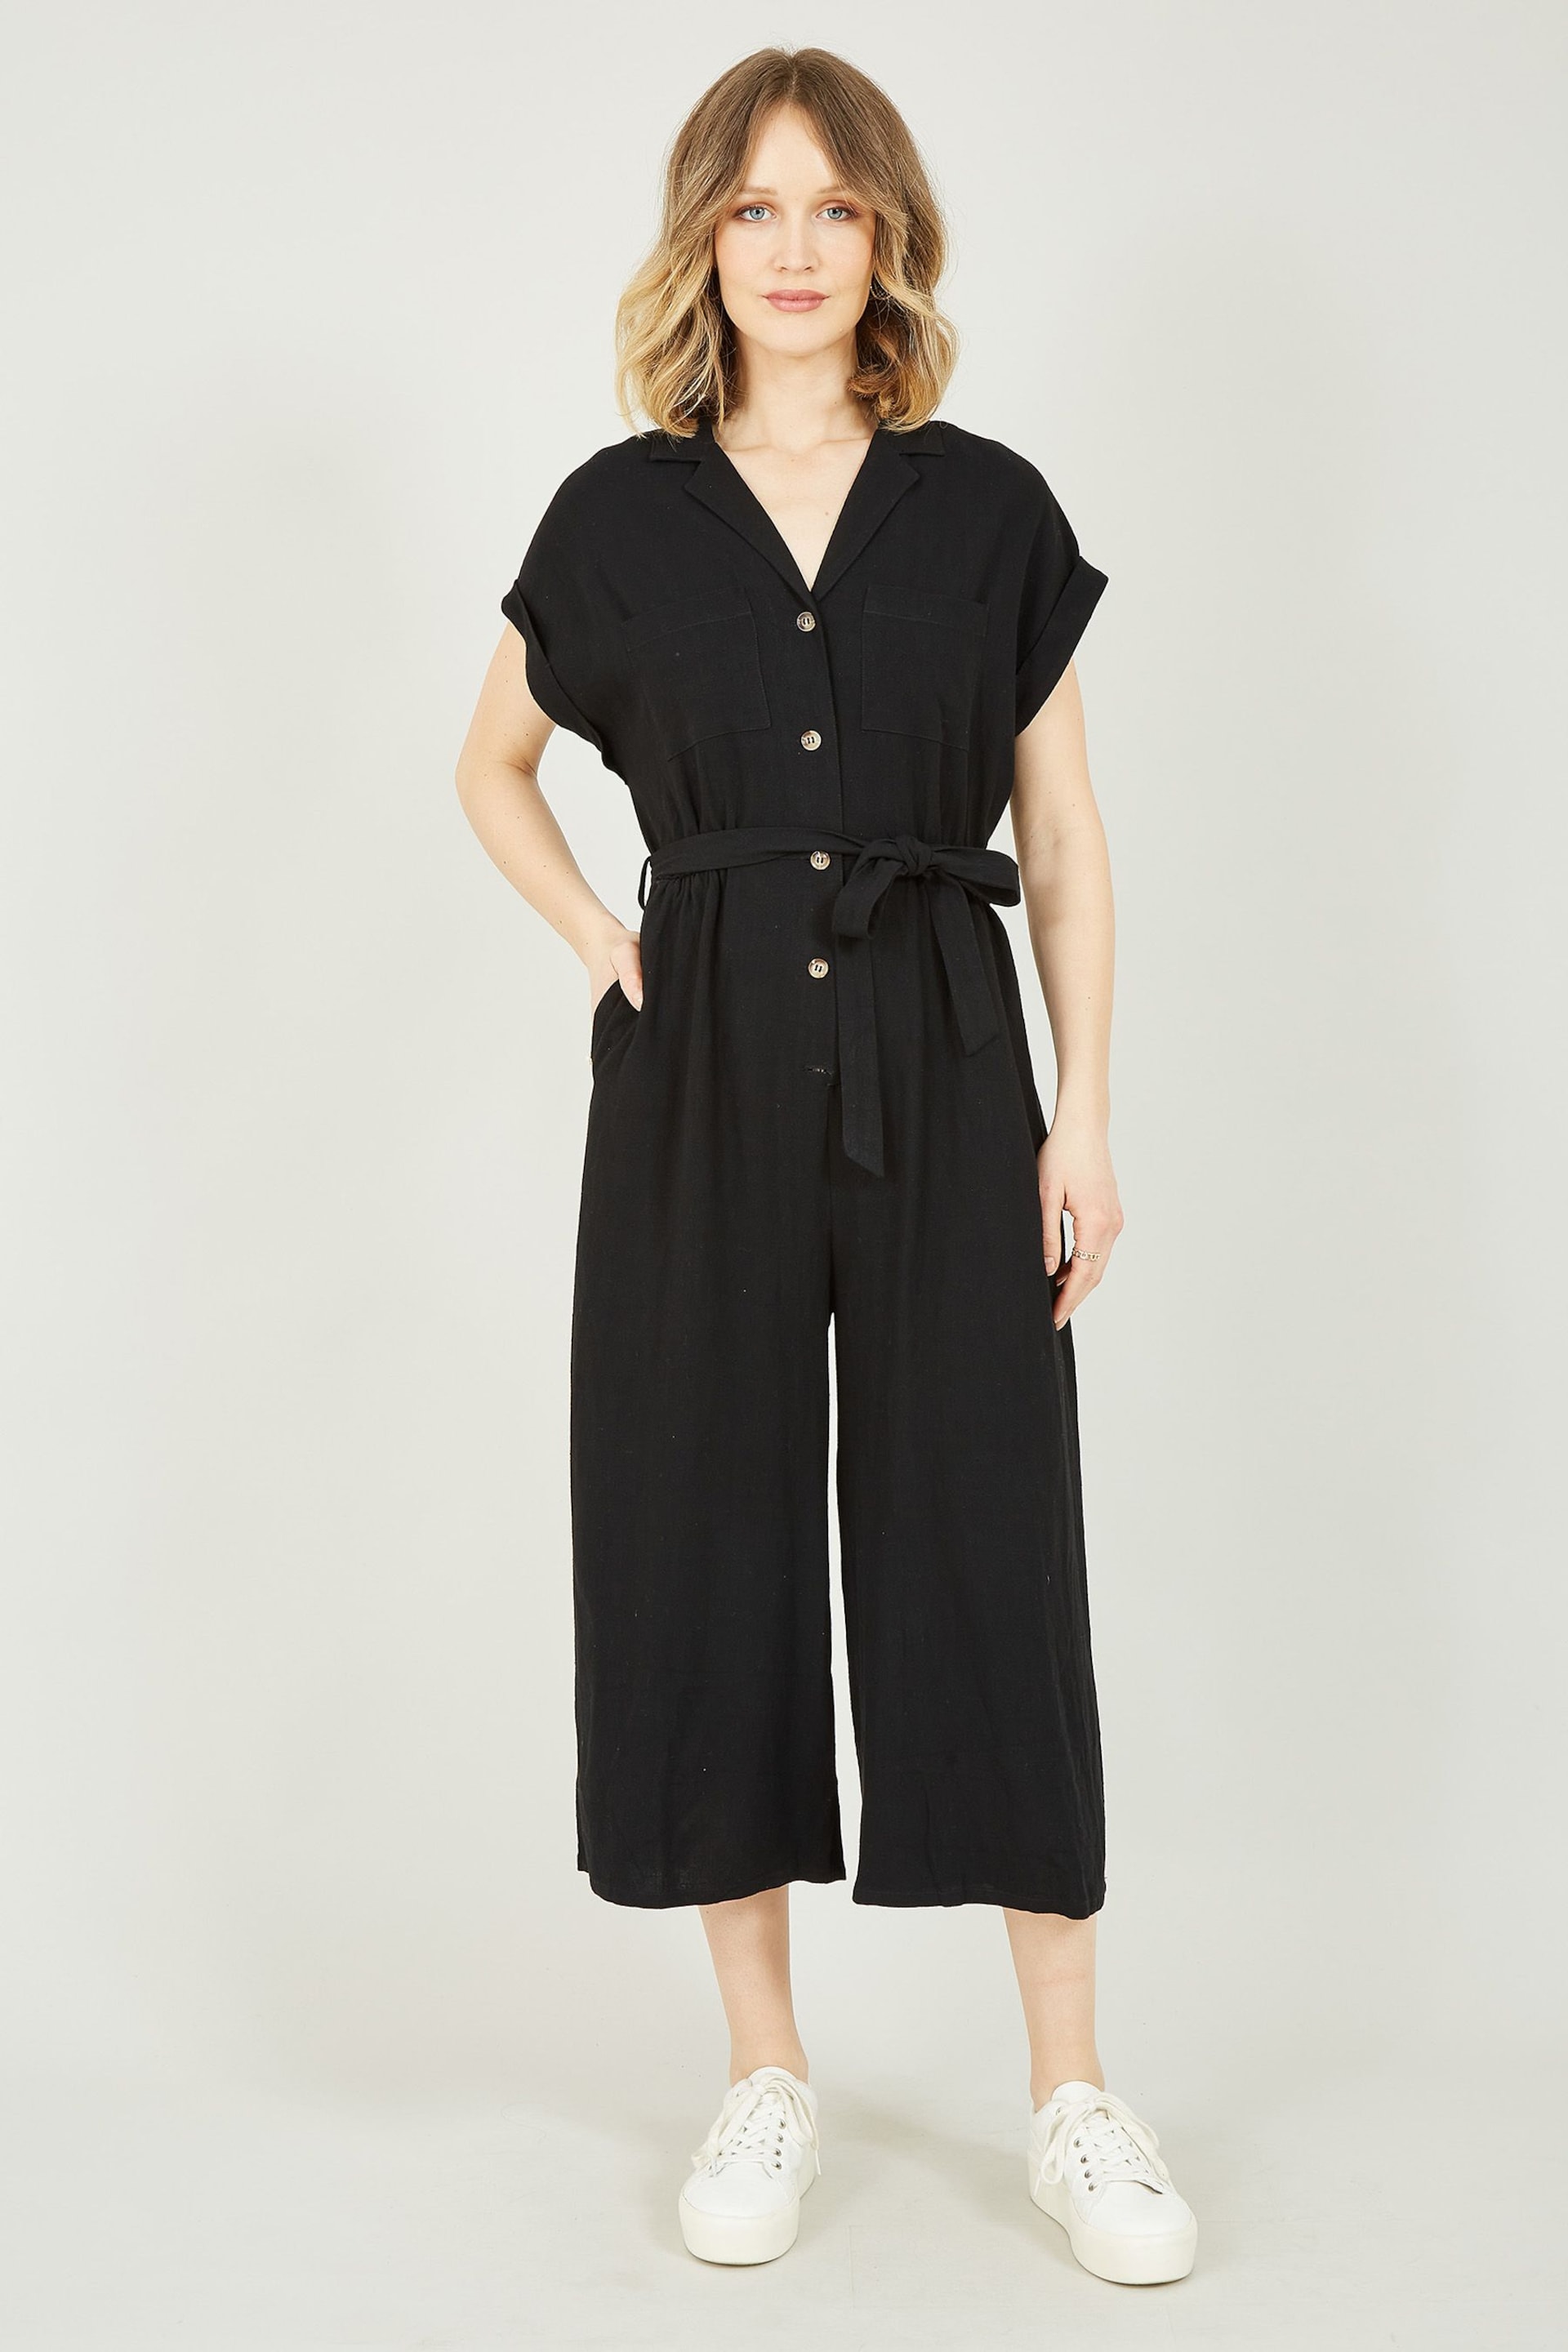 Yumi Black Button up Jumpsuit - Image 3 of 5